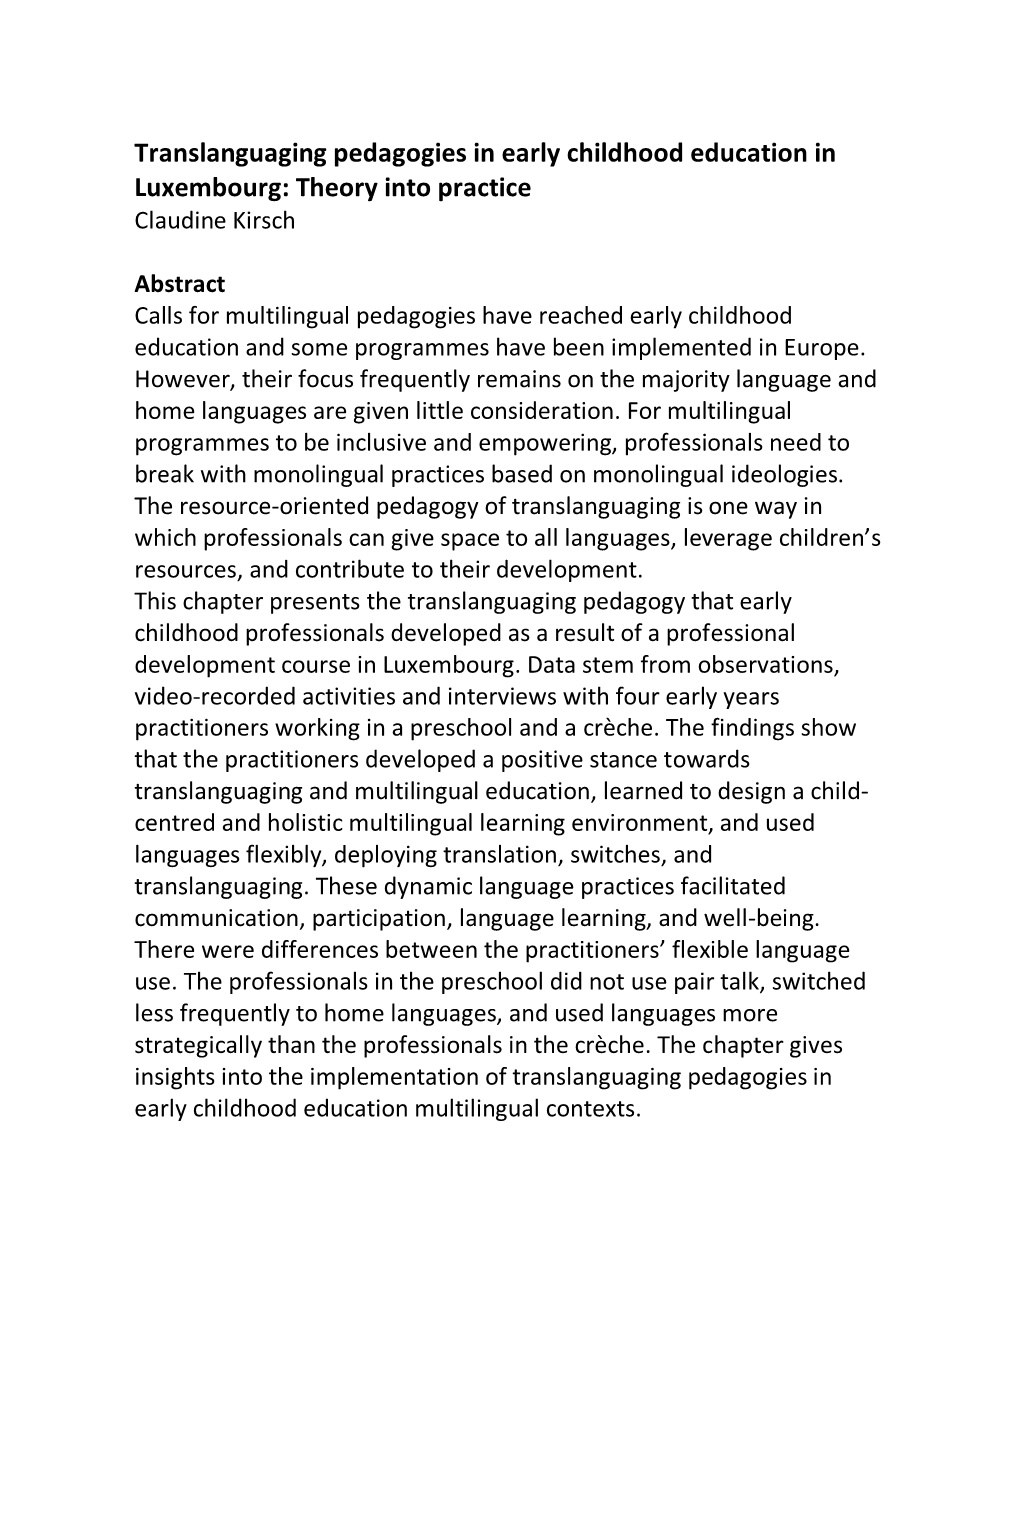 Translanguaging Pedagogies in Early Childhood Education in Luxembourg: Theory Into Practice Claudine Kirsch